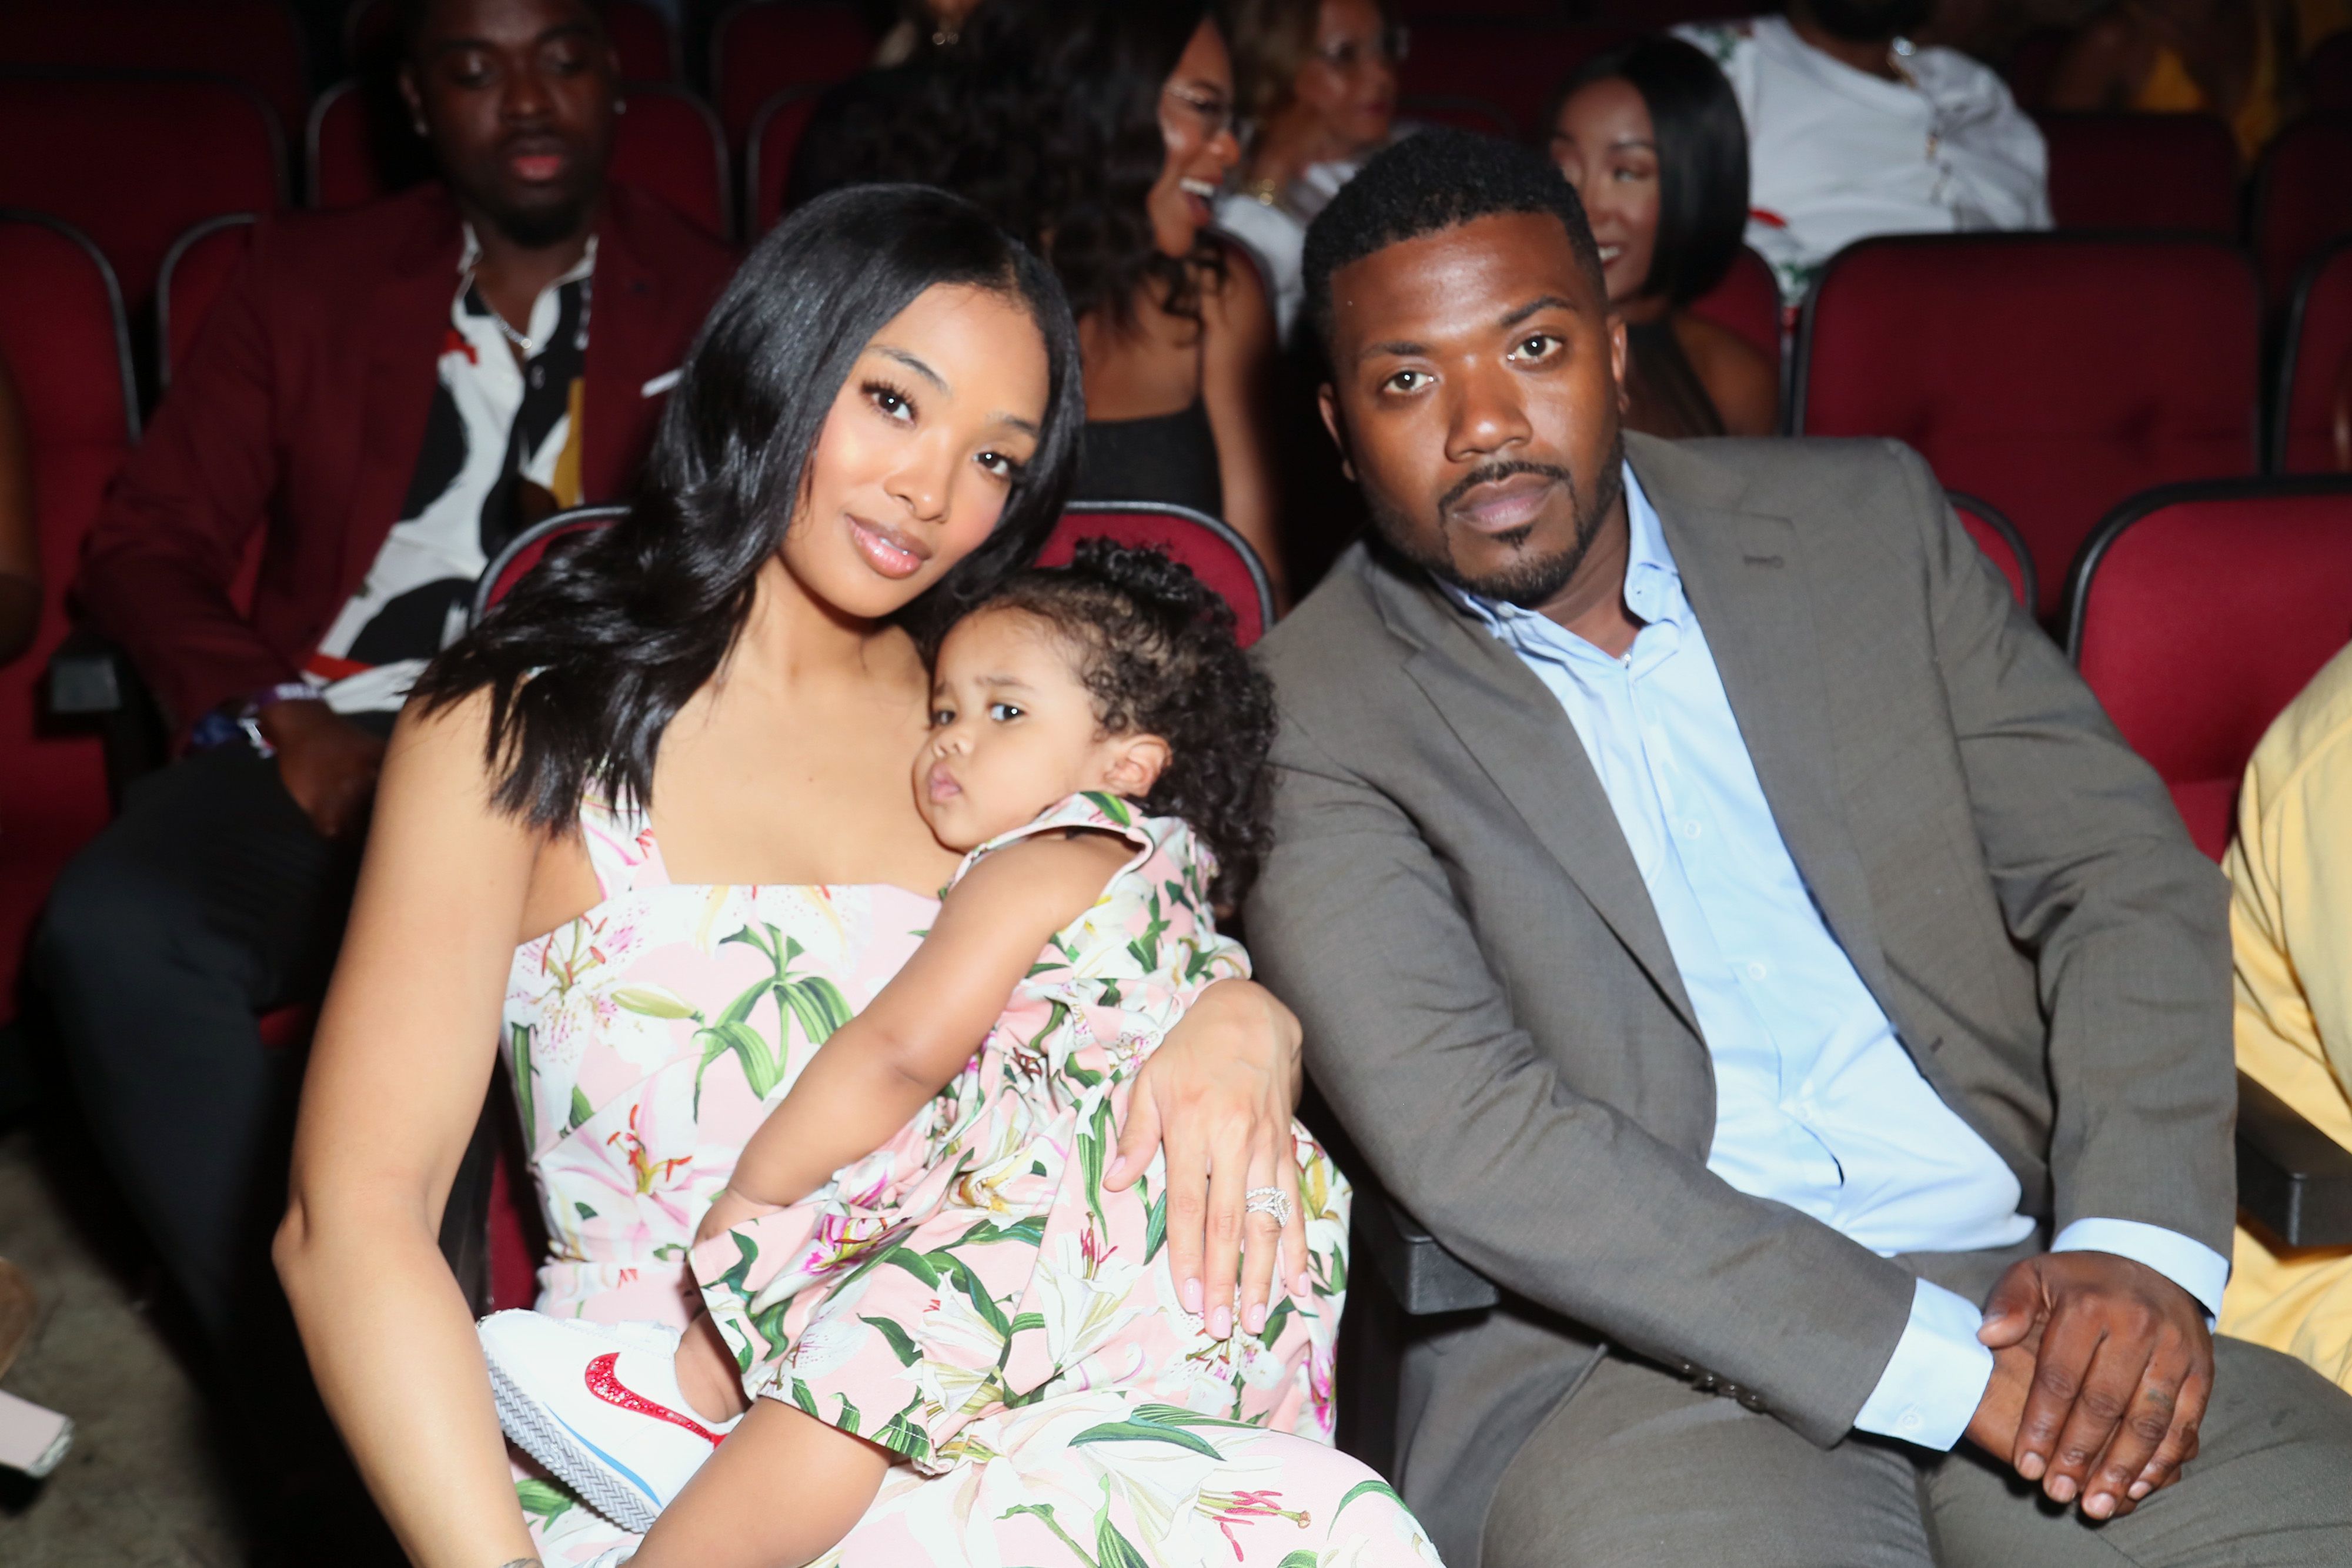 Princess Love, Melody Love and Ray J| Photo: Getty Images